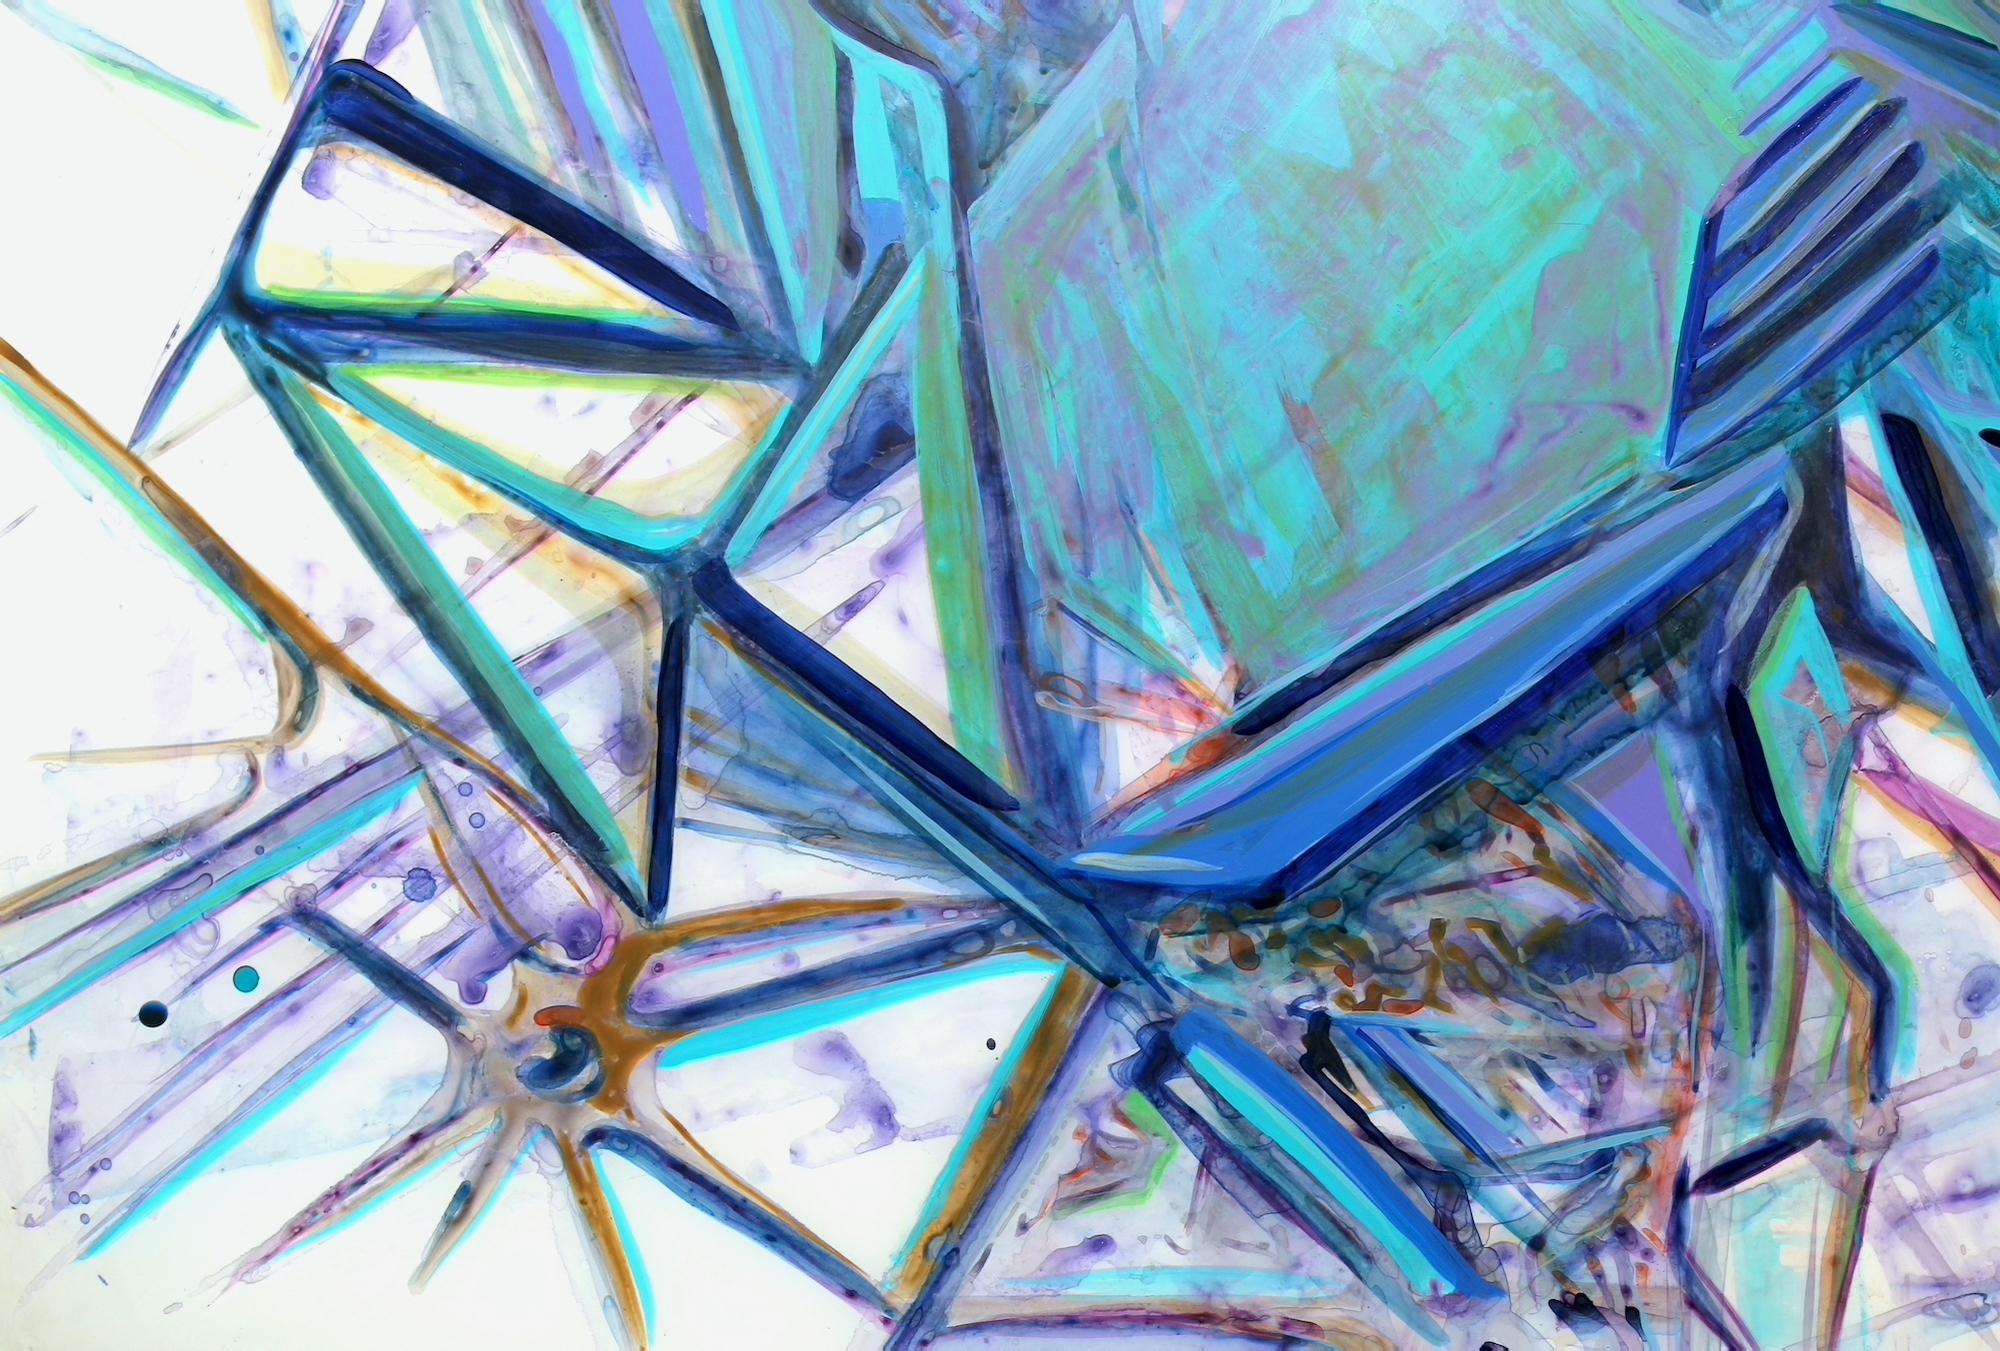 Harmony of Triangles, jewel toned gestural architectural abstract  - Painting by Zahra Nazari